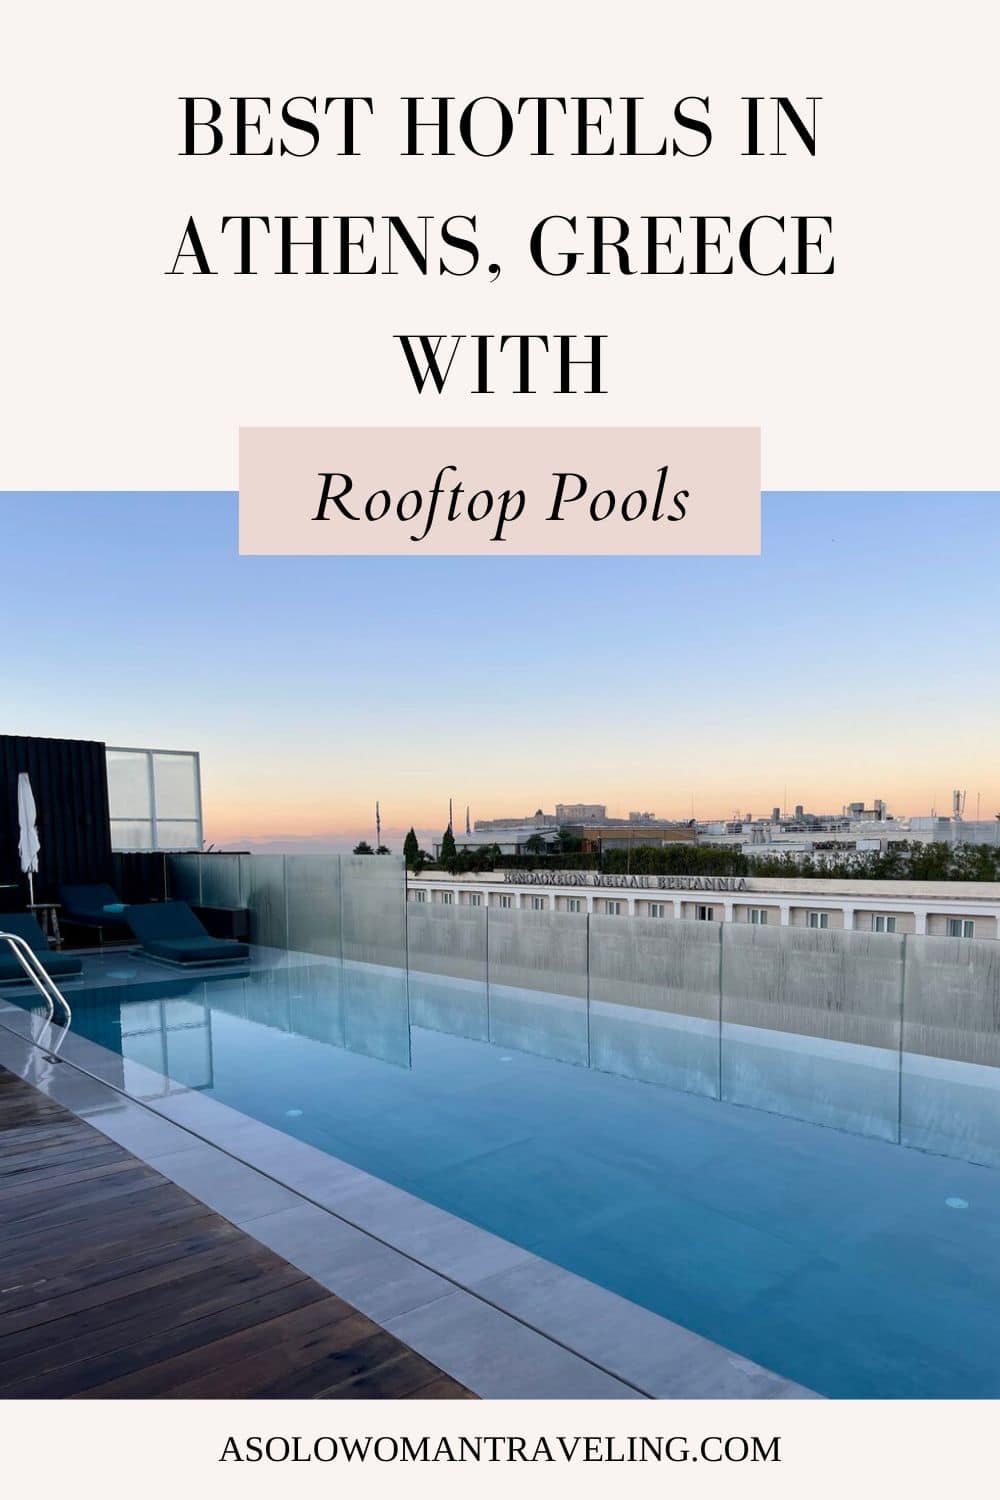 Where to stay in Athens with a rooftop pool